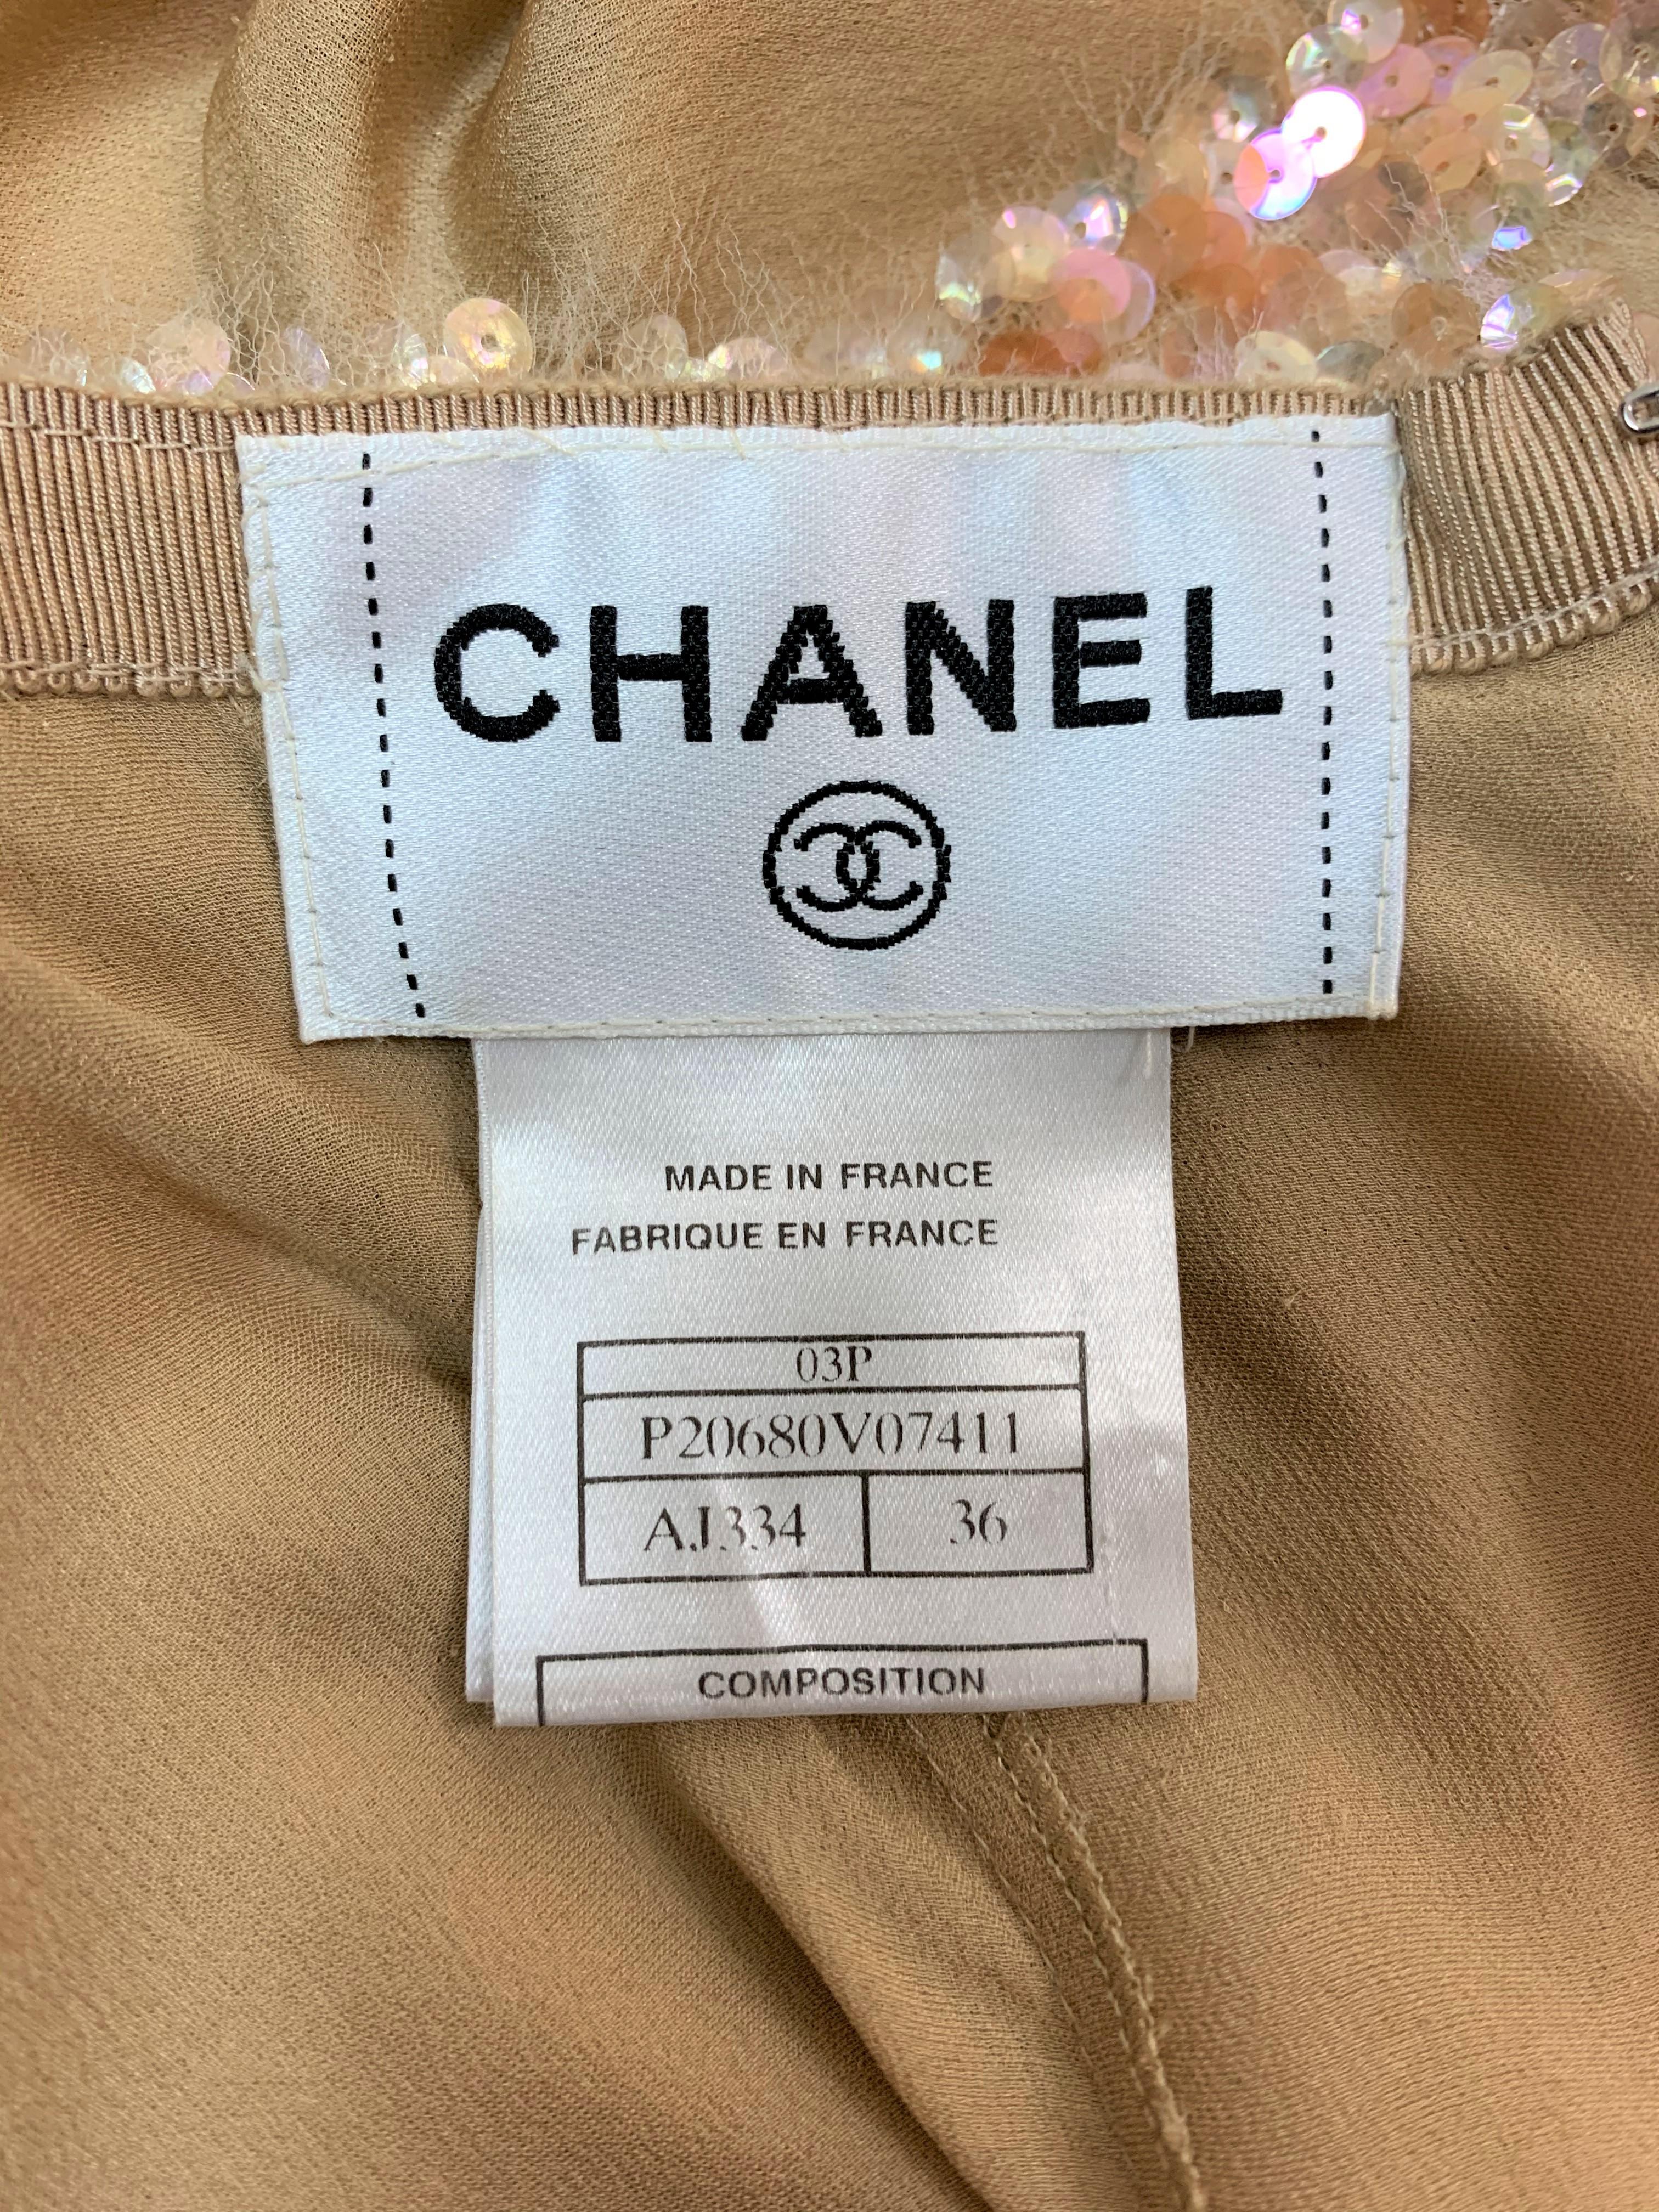 S/S 2003 Chanel Nude Silk Cut-Out Plunging Embellished Gown Dress In Good Condition In Yukon, OK